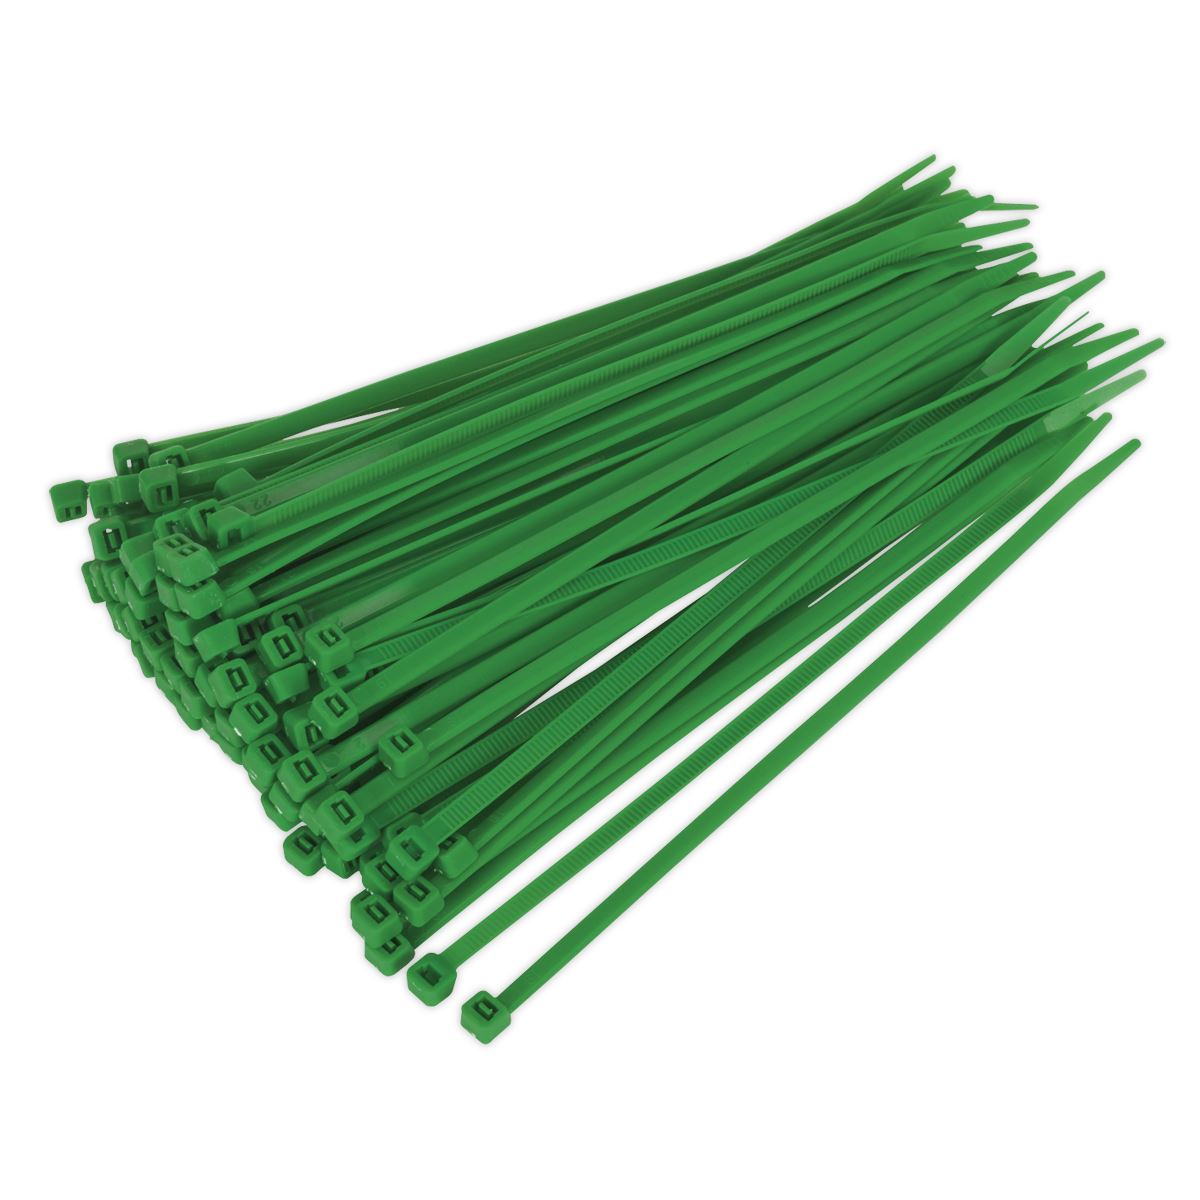 Sealey Cable Tie 200 x 4.4mm Green Pack of 100